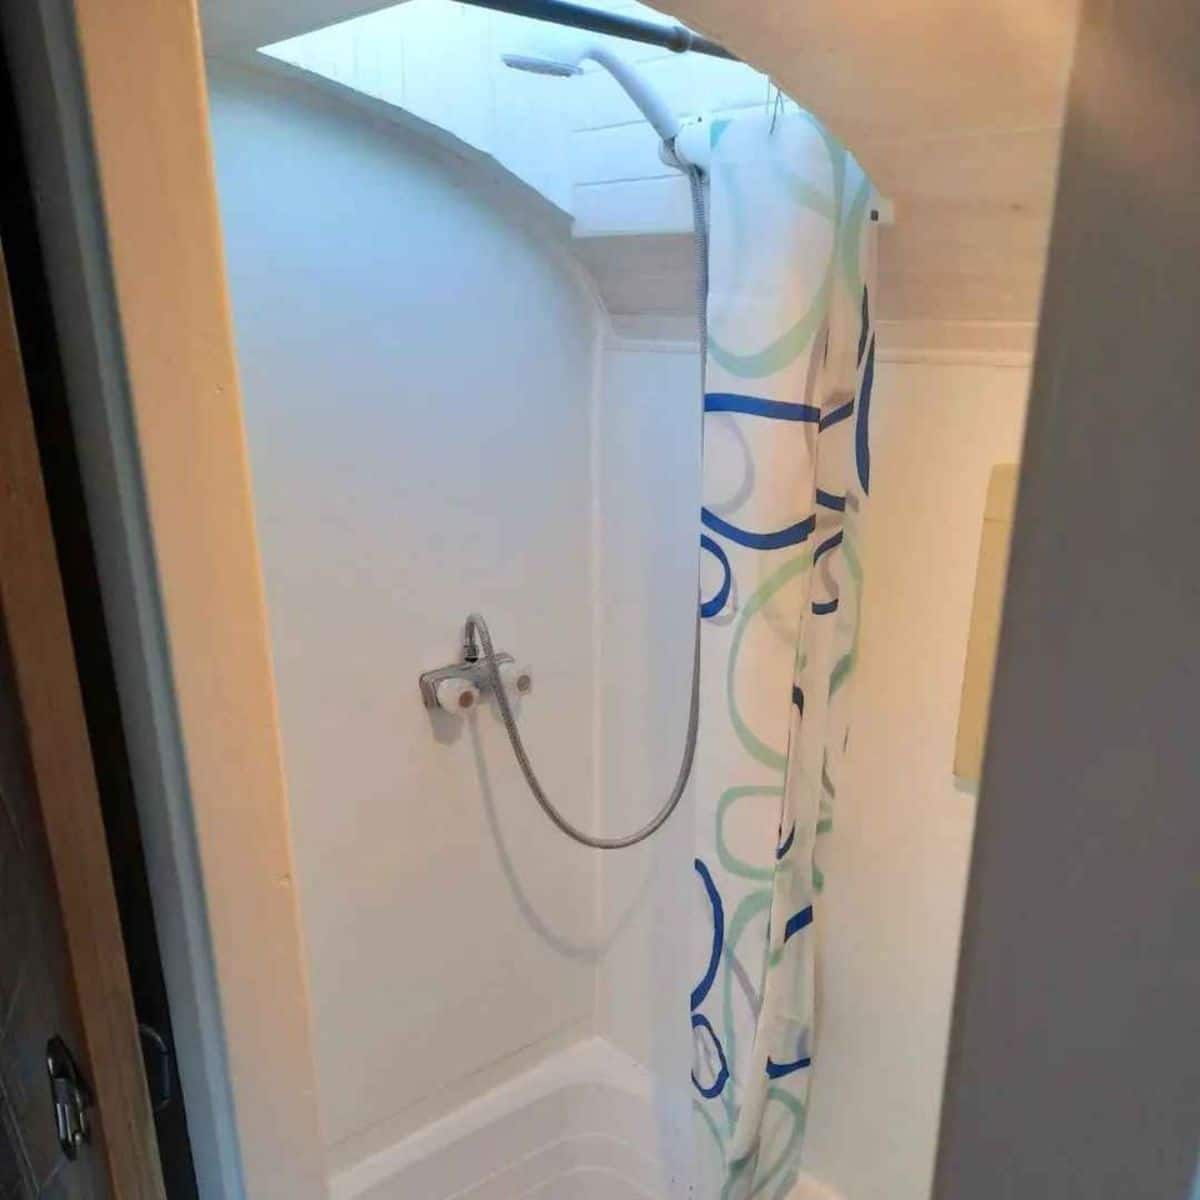 Shower area with bathtub in bathroom of converted tiny home